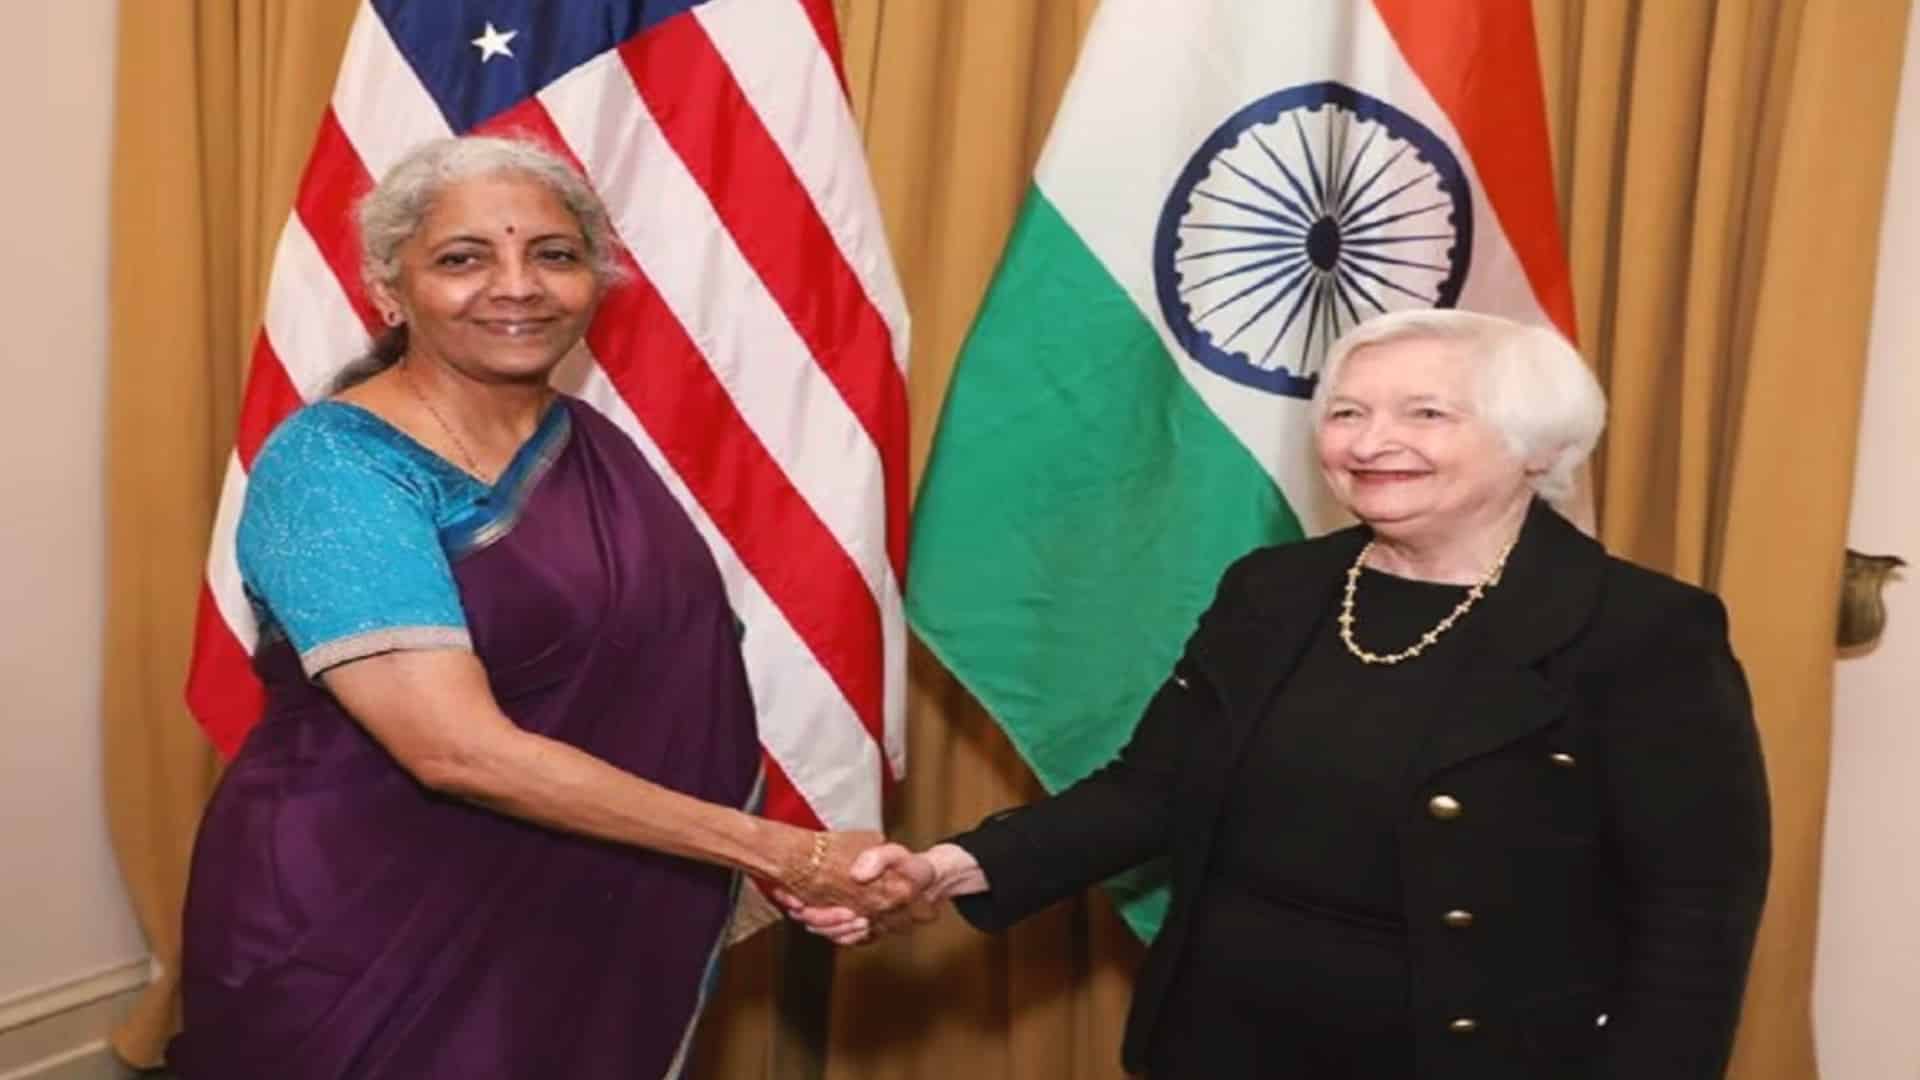 India, US commit to strengthening ties, look for alternatives to fund energy transition